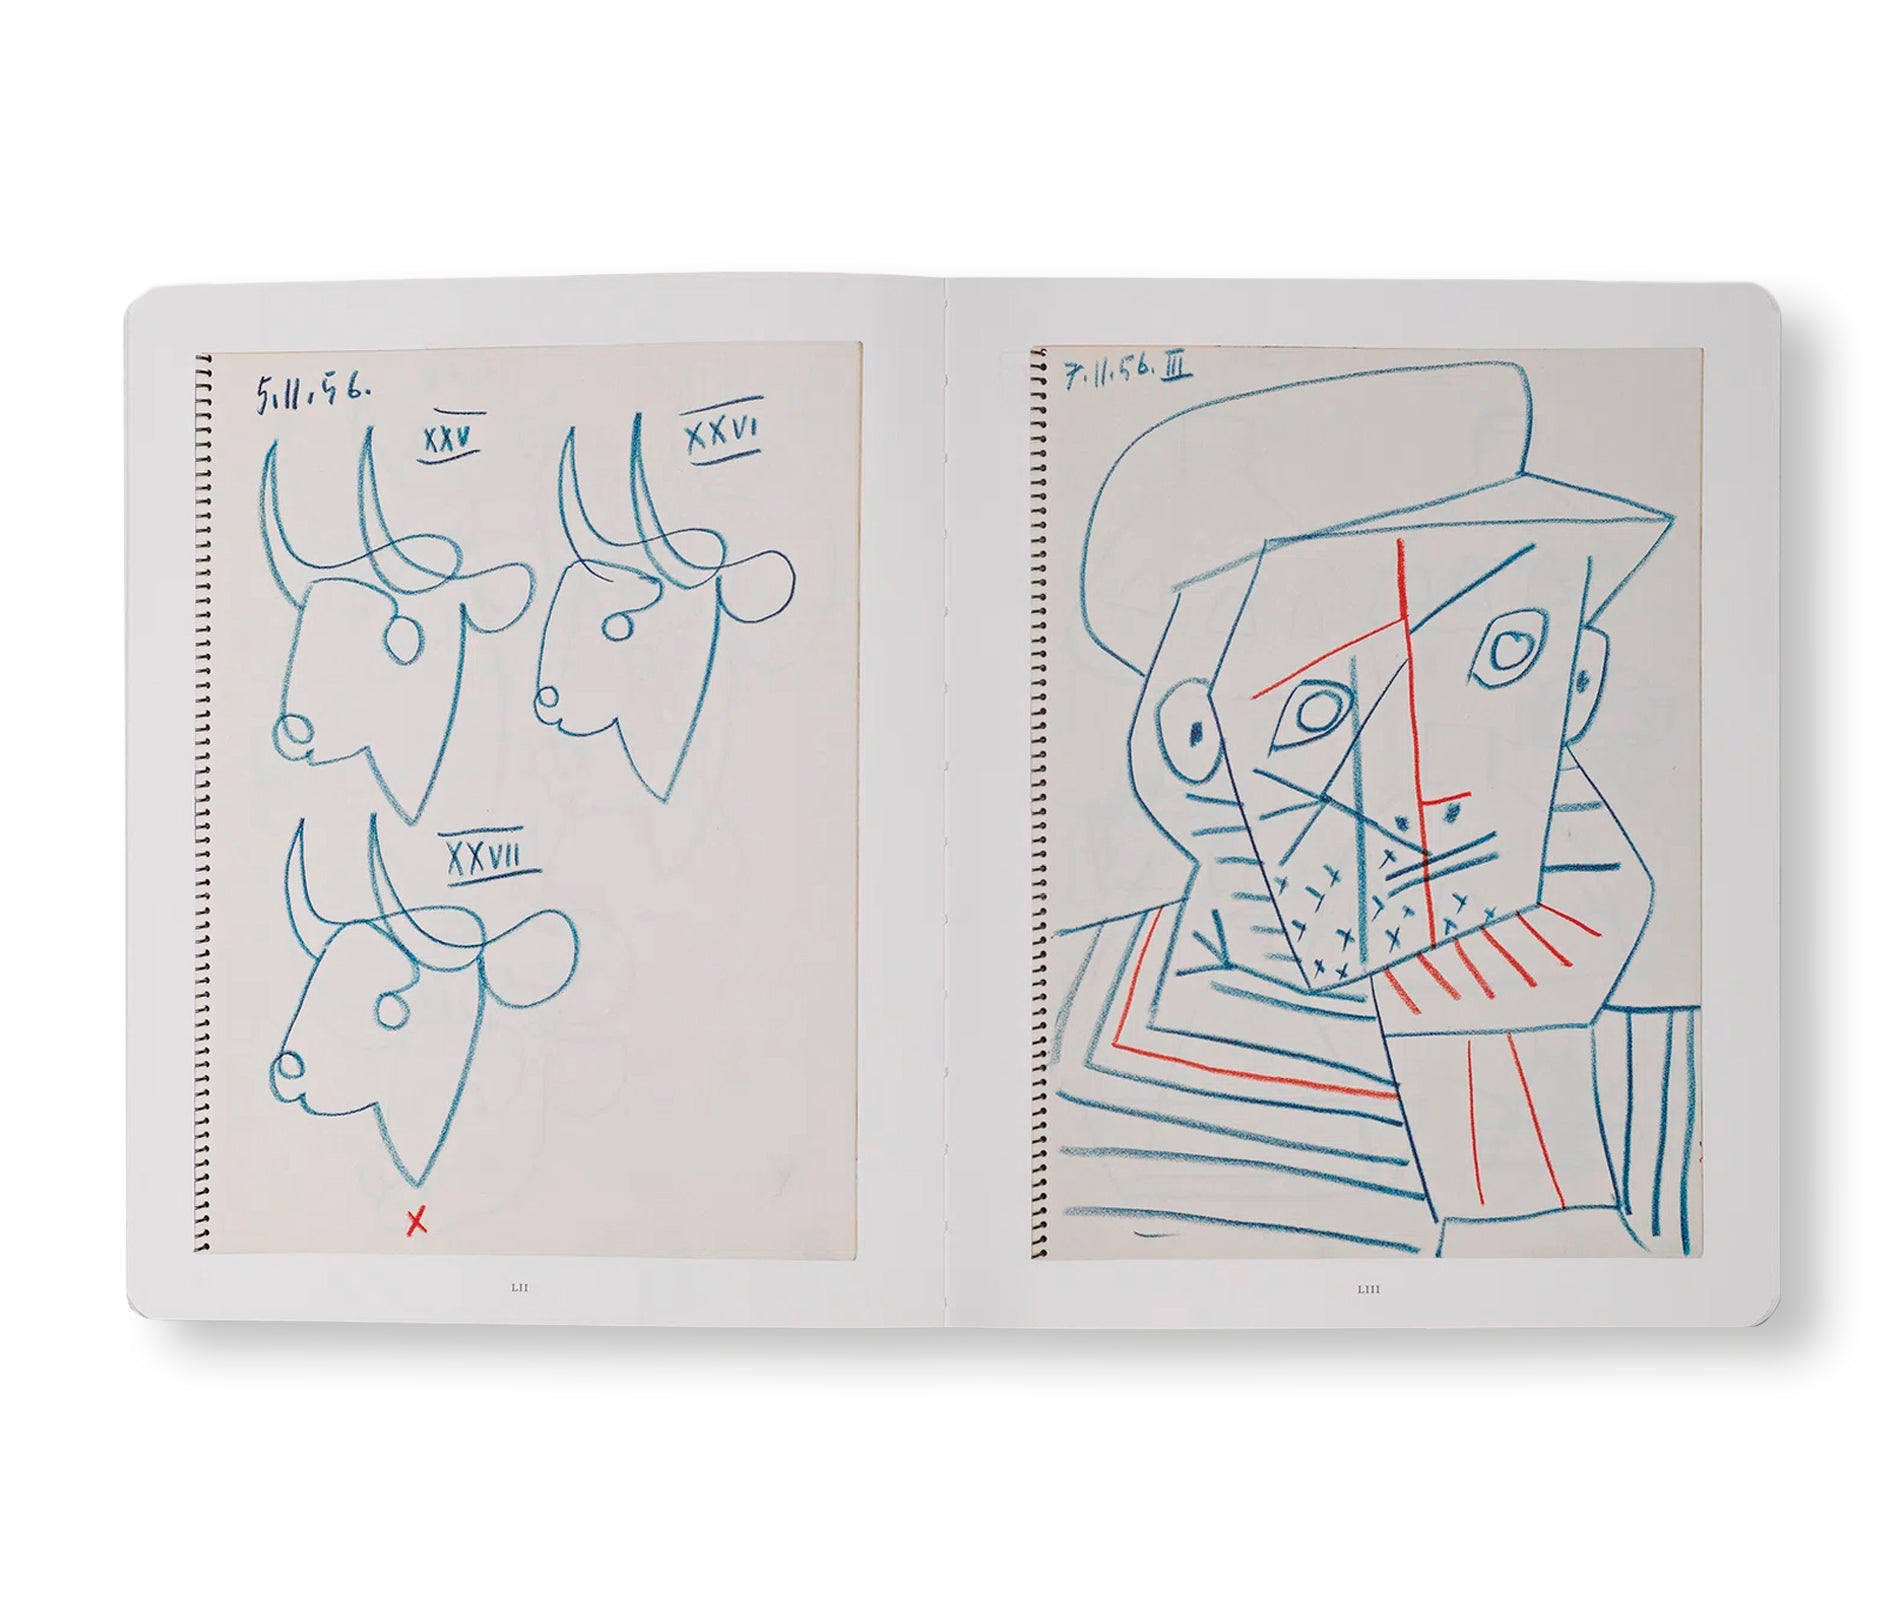 PICASSO: 14 SKETCHBOOKS by Pablo Picasso